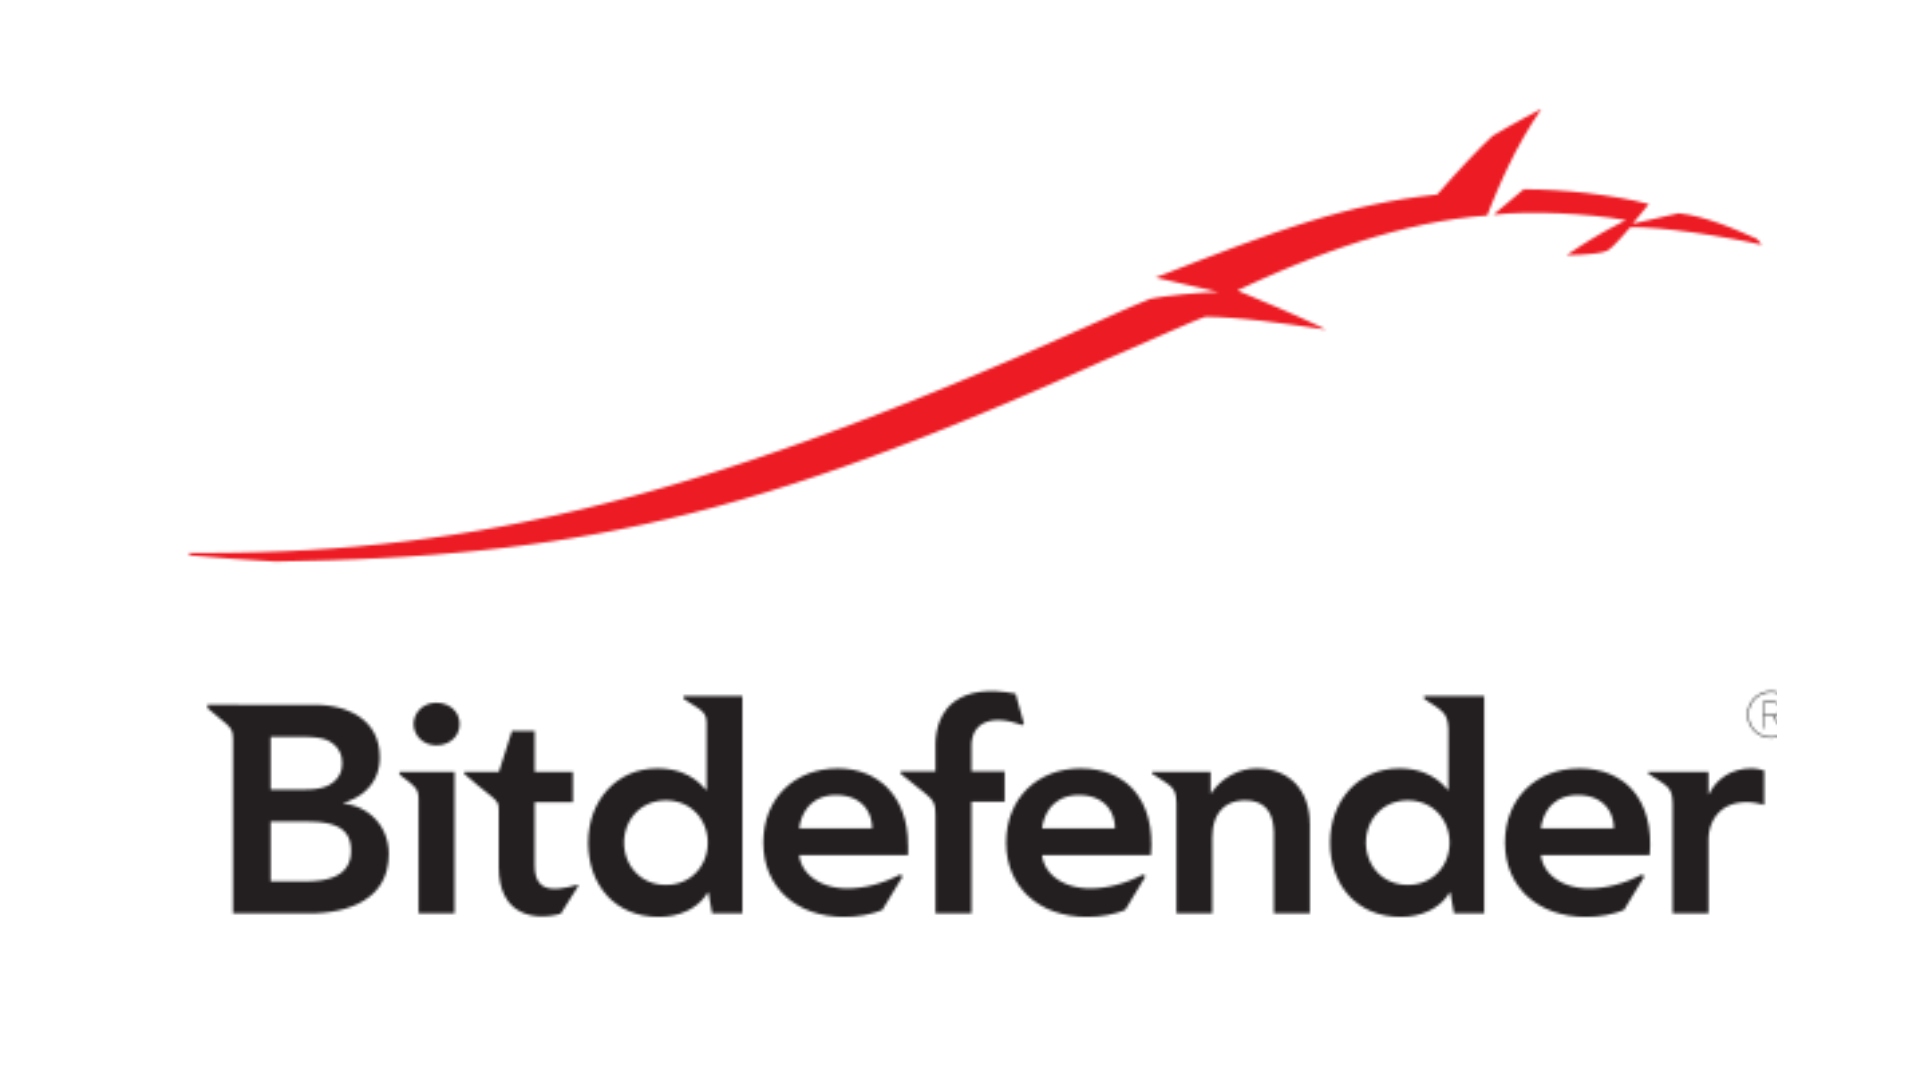 Best antivirus for PC - Bitdefender. Its logo is on a white background.